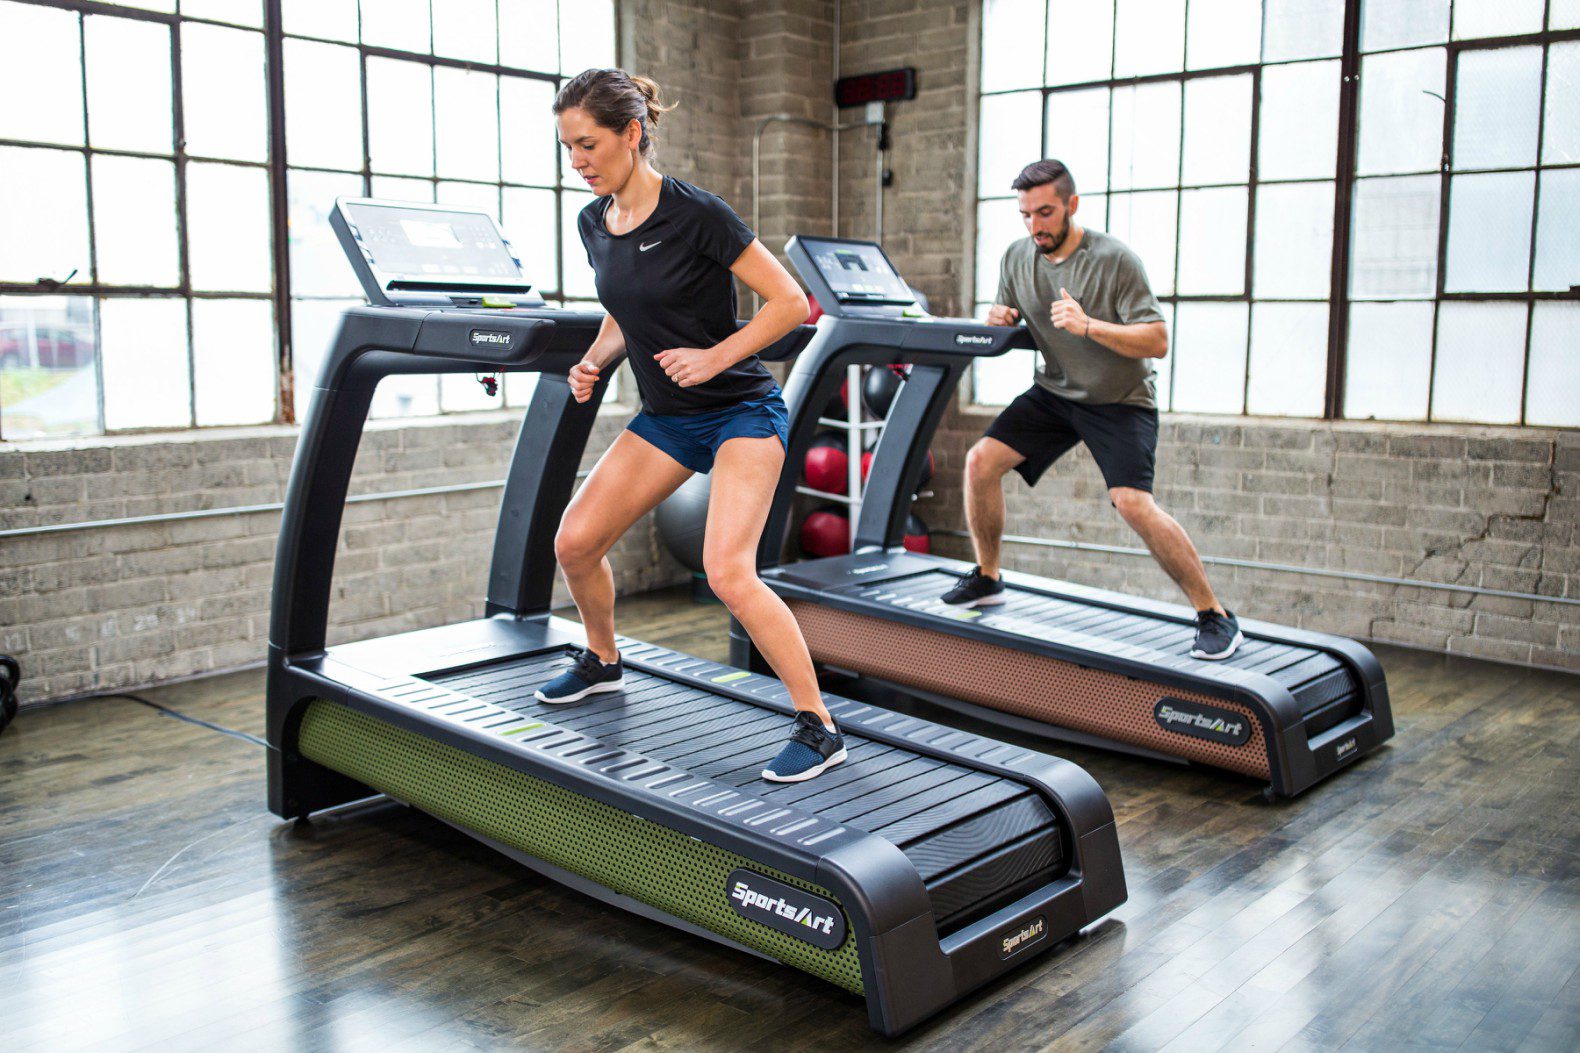 CES 2019: The Verde G690 treadmill helps you cut weight and your power bill